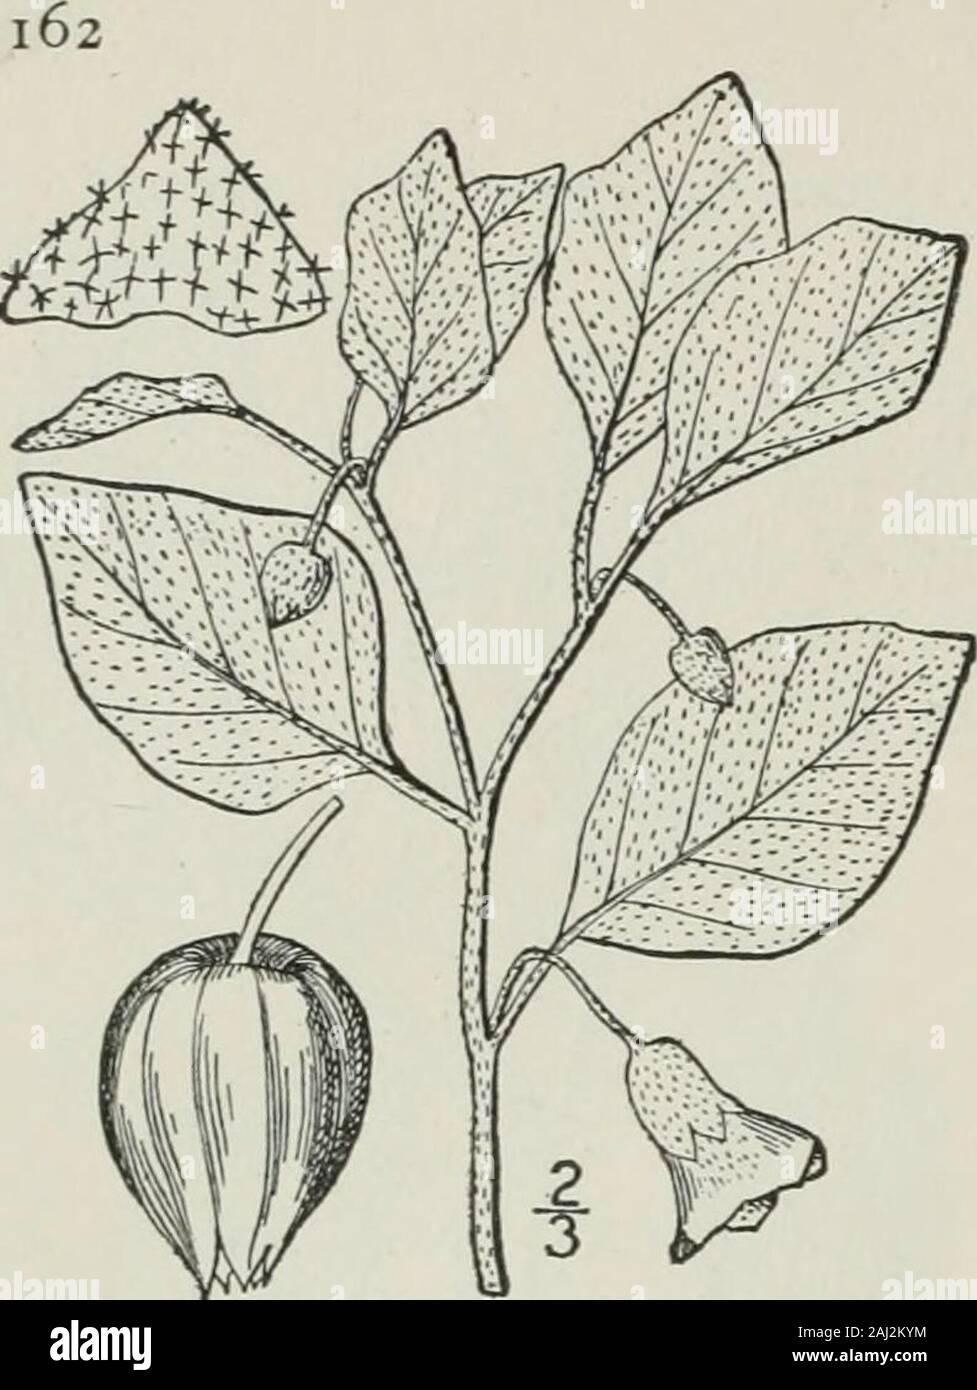 An illustrated flora of the northern United States, Canada and the British possessions : from Newfoundland to the parallel of the southern boundary of Virginia and from the Atlantic Ocean westward to the 102nd meridian . SOLANACEAE. Vol. III. 17. Physalis viscosa L. Stellate Ground-Cherry, Yellow-henbane. Fig. 3712. Physalis viscosa L. Sp. PI. 1S3. 1753. Physalis pennsylvanica L. Sp. PI. Ed. 2, 1670. 1763. Perennial from a slender creeping rootstock; stemsslender, creeping, with a dense ashy stellate pubes-cence, or in age rarely glabrate. Leaves elliptic,oval or ovate, obtuse, thinish, entire Stock Photo